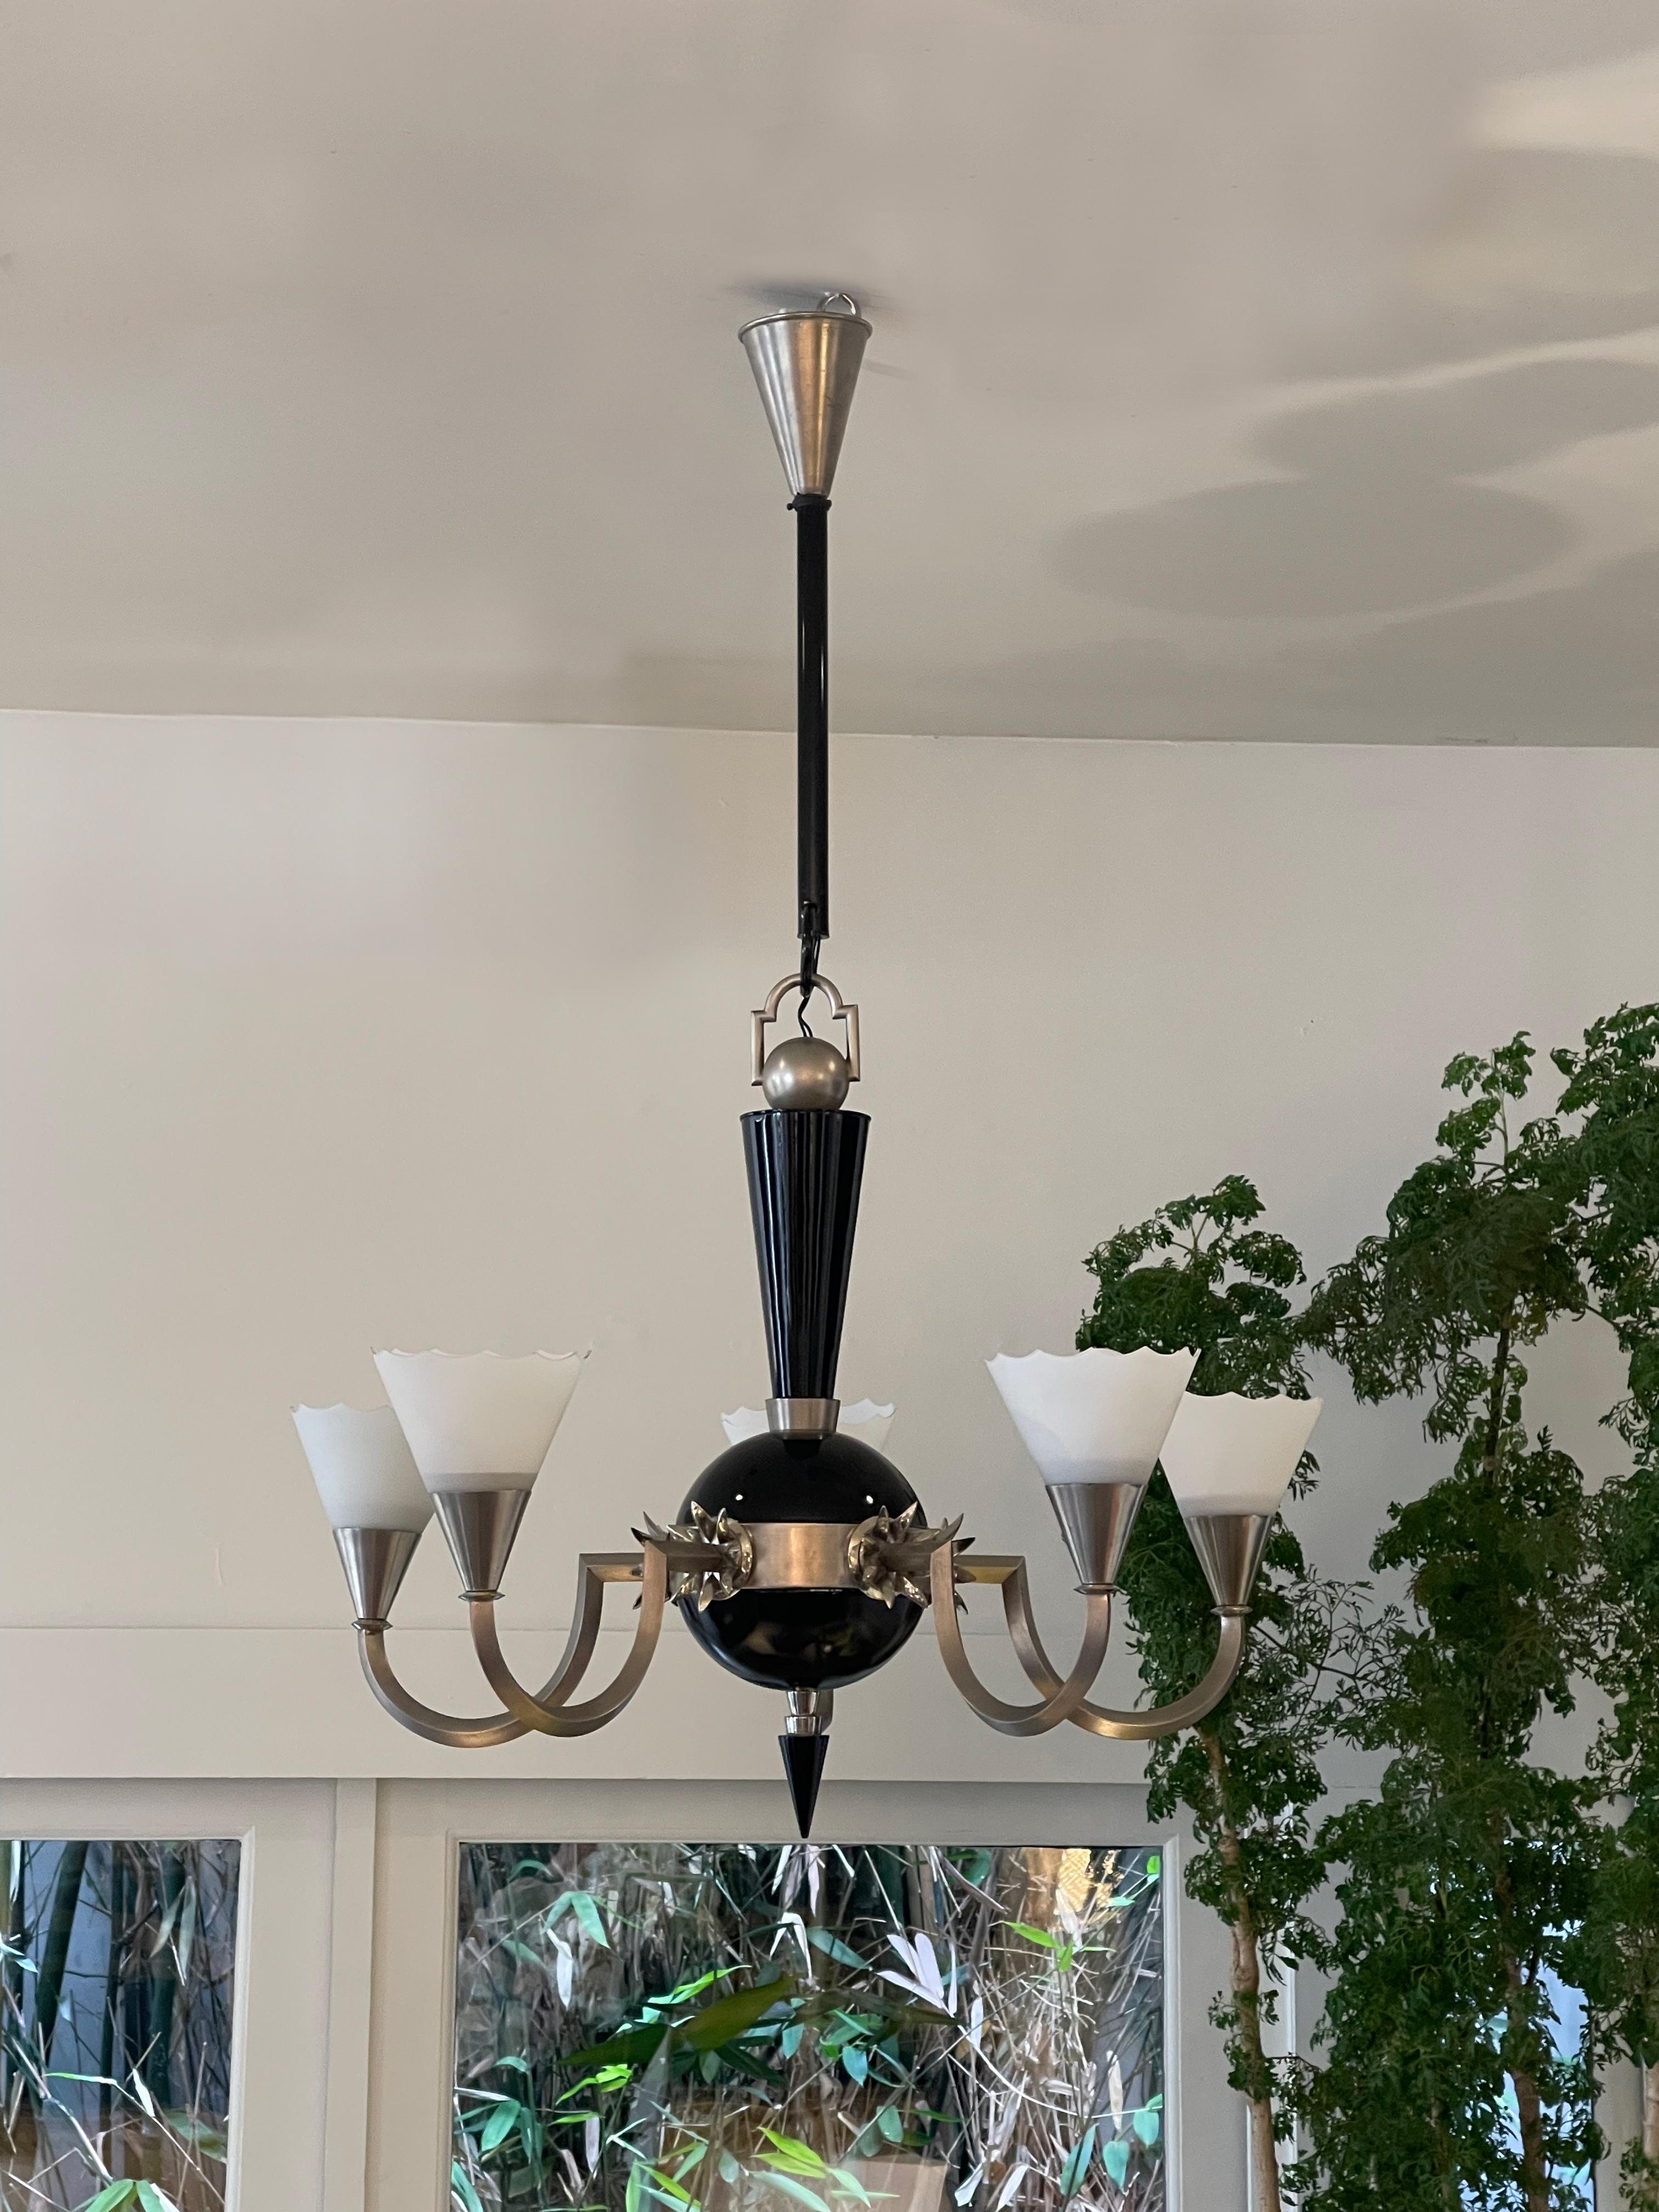 Five-arm chrome chandelier with stylized floral leaves jutting out by arms. Center ball, spike and stem are all black lacquer. Five delicate milk glass shades with a scallop trim.